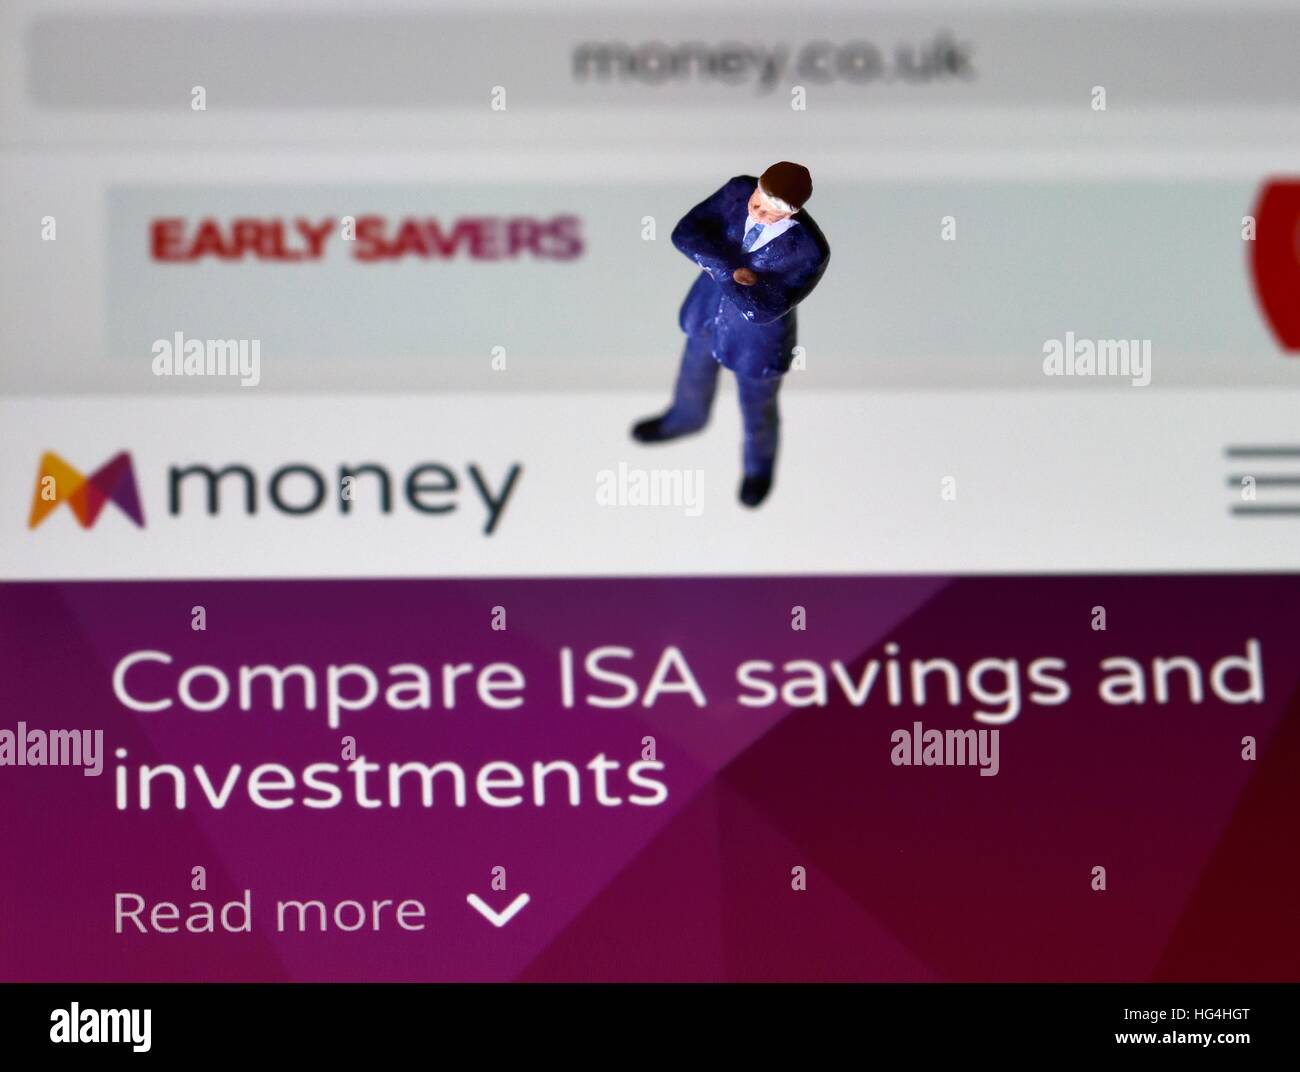 Compare ISA savings and investments iphone screen web page Stock Photo